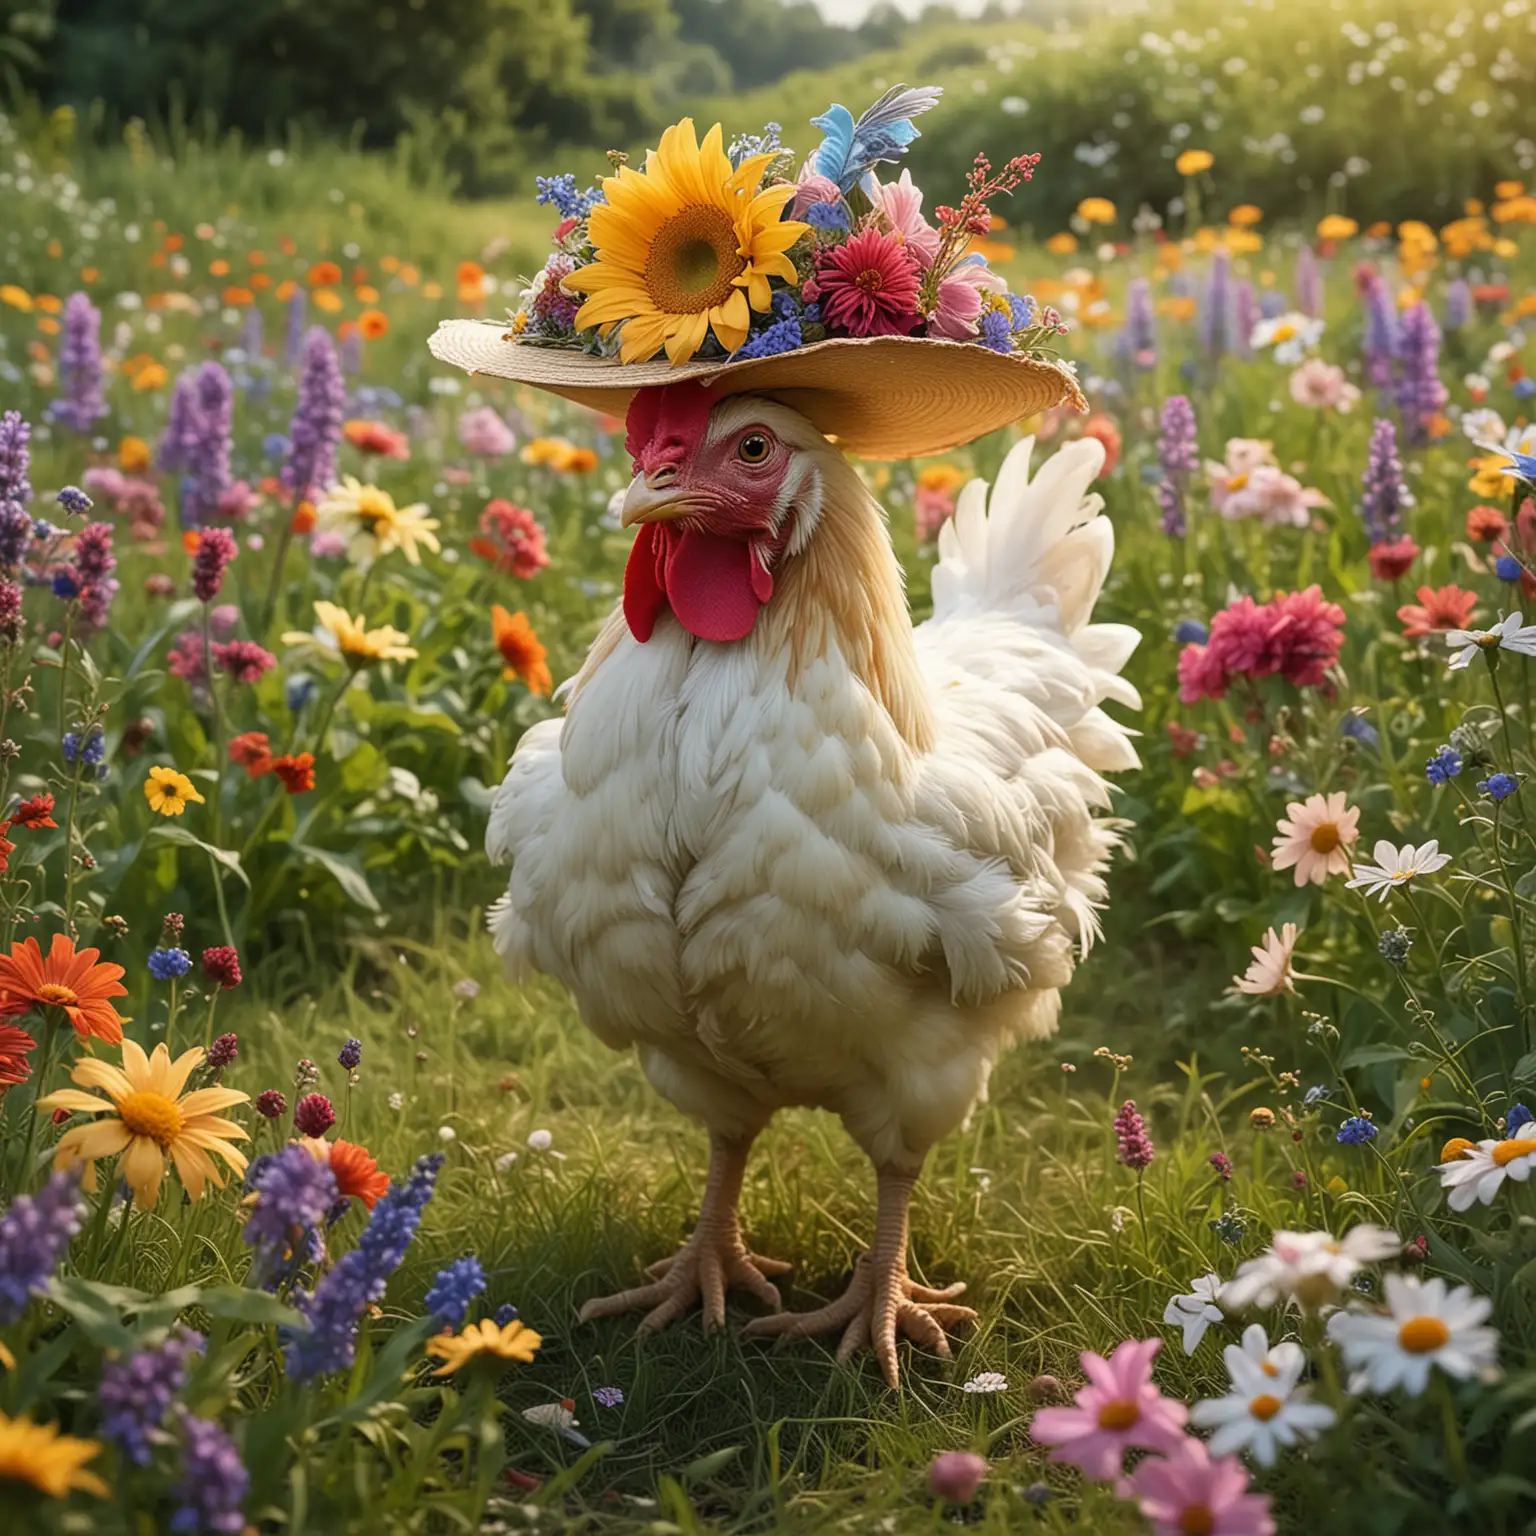 A realistic, beautiful, magical photo depicting a comic scene in which a colorful chicken in an elegant hat traverses a meadow full of various magical flowers. In the background, gently wavy flowers, and our heroine, dressed in an unexpectedly elegant hat, looks as if she is ready for extraordinary adventures. It's a picture full of humor and charm